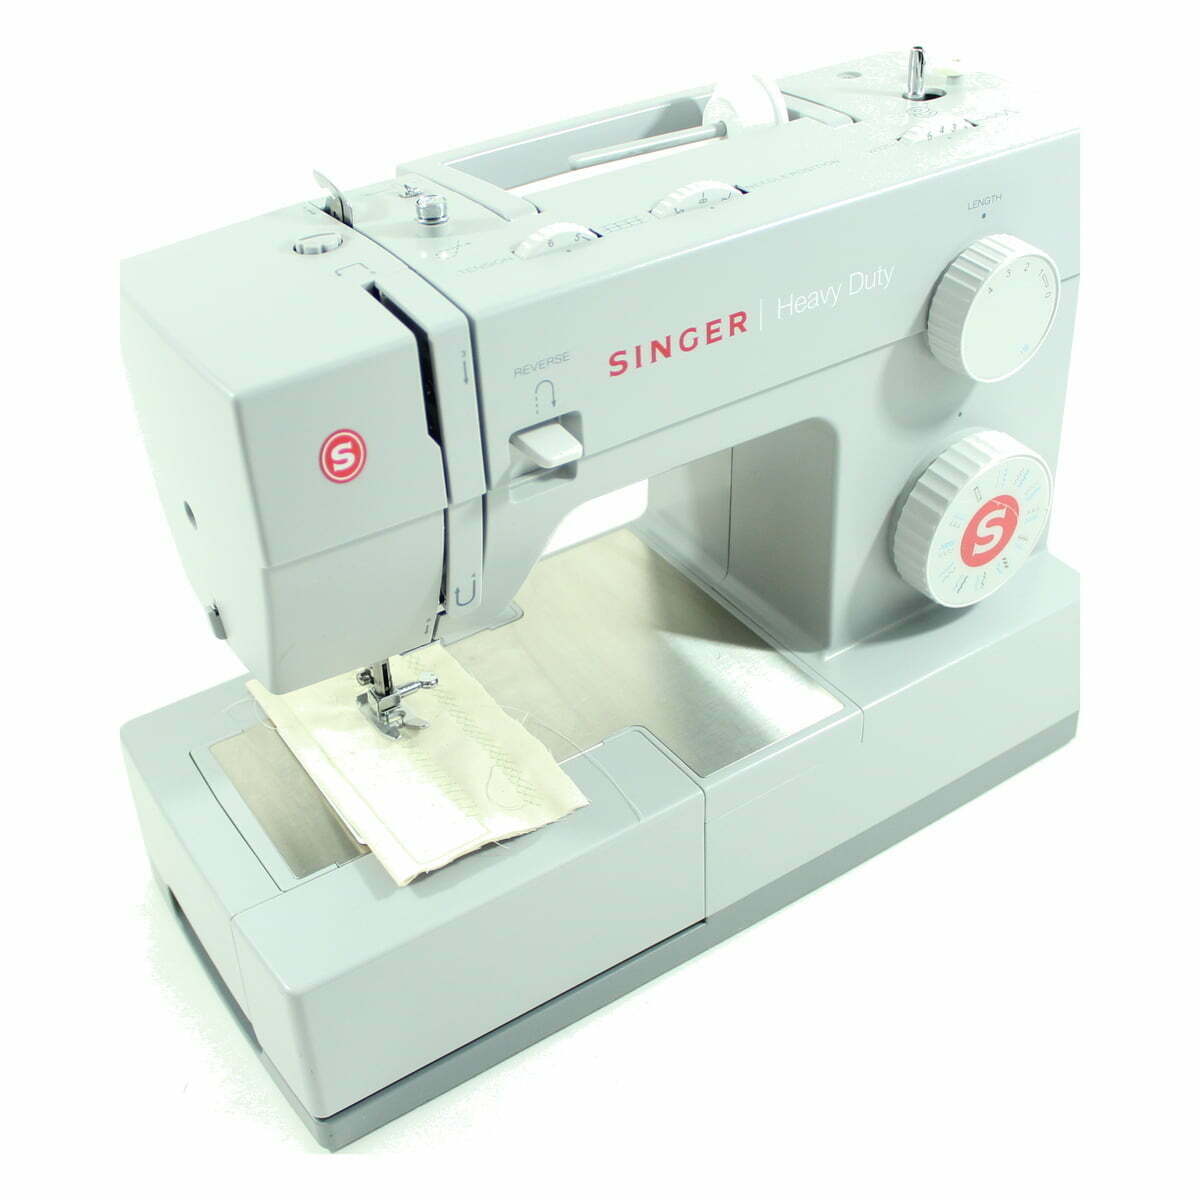 How Good Is The Singer Heavy Duty 4423 Sewing Machine ?